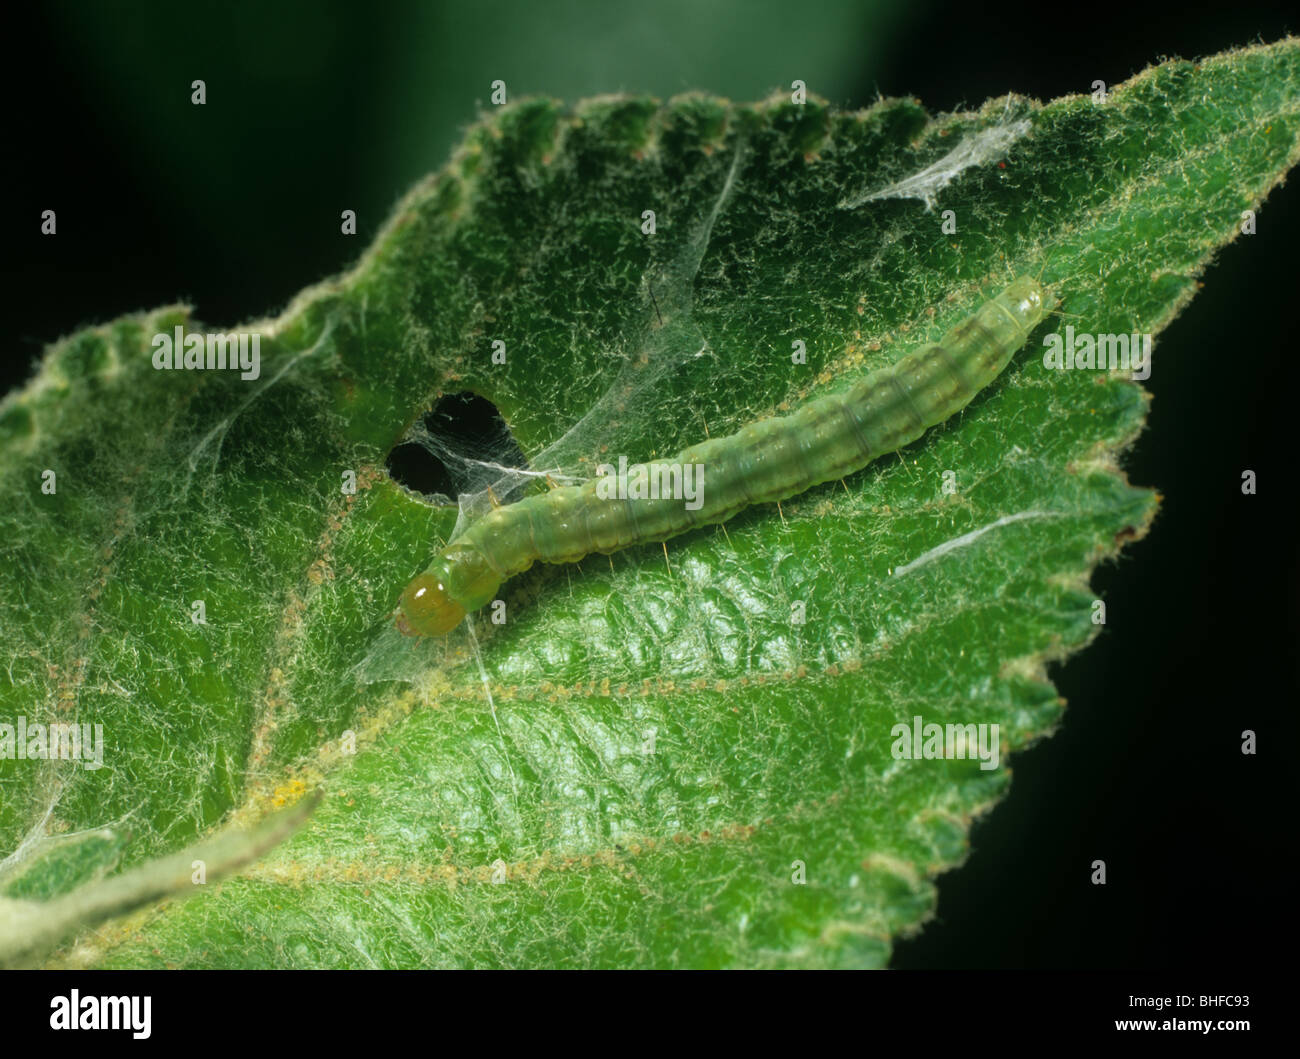 Summer fruit tortrix (Adoxophyes orana) caterpillar in an apple leaf fold Stock Photo